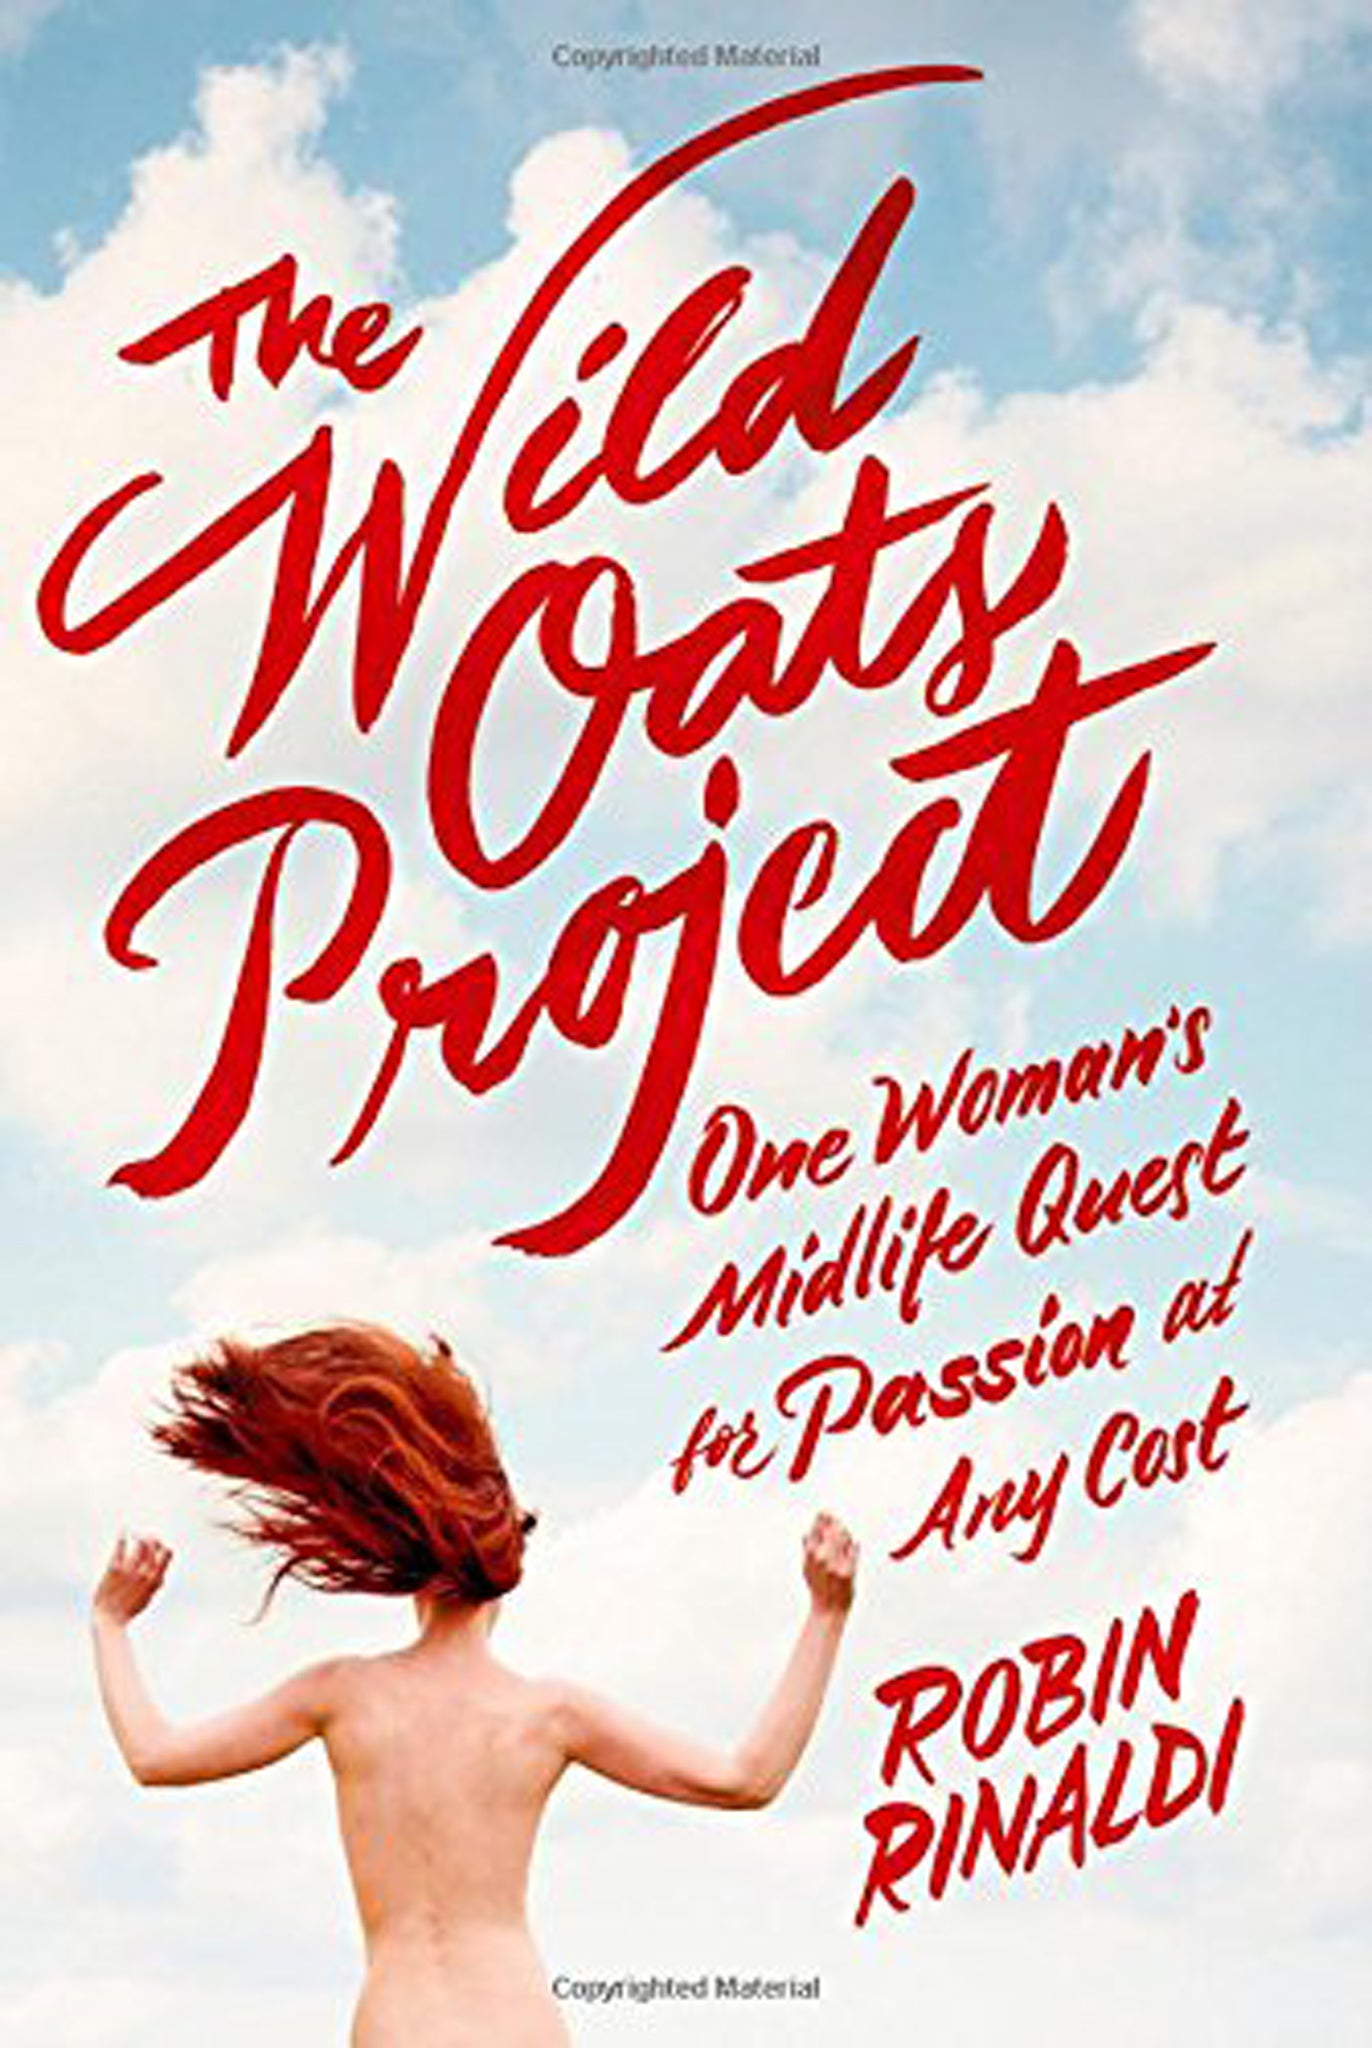 Robin Rinaldi has written about her open relationship in new book 'The Wild Oats Project'